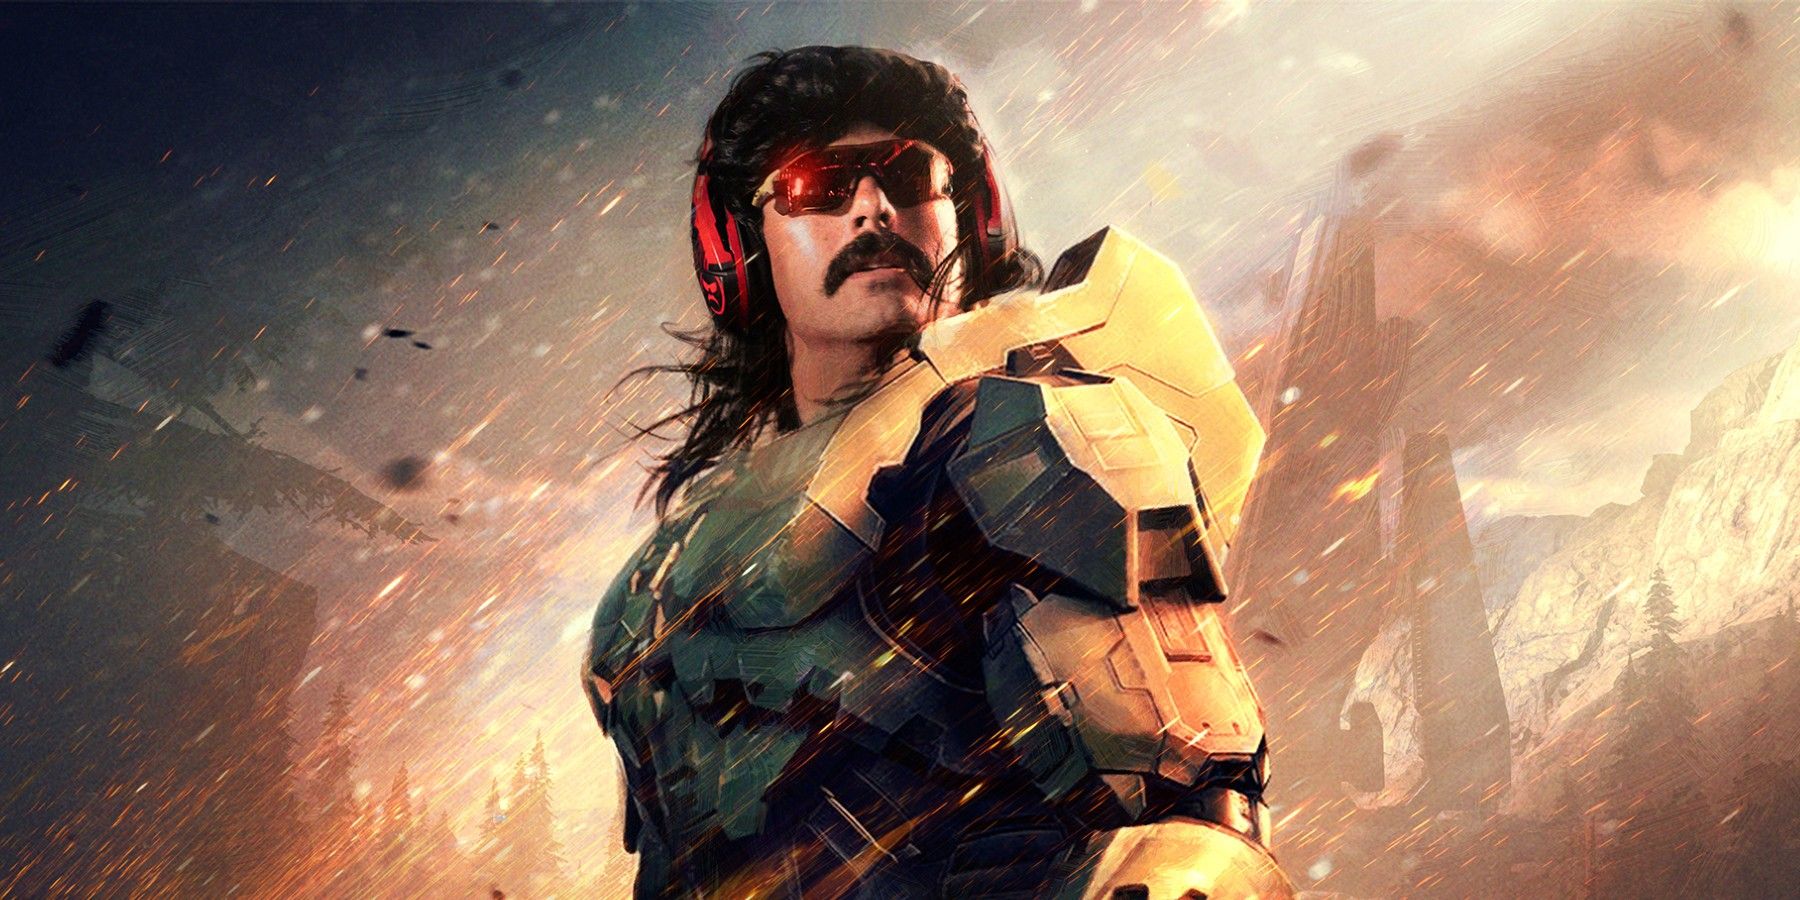 Dr Disrespect Suggests One Change to Improve Halo Infinite